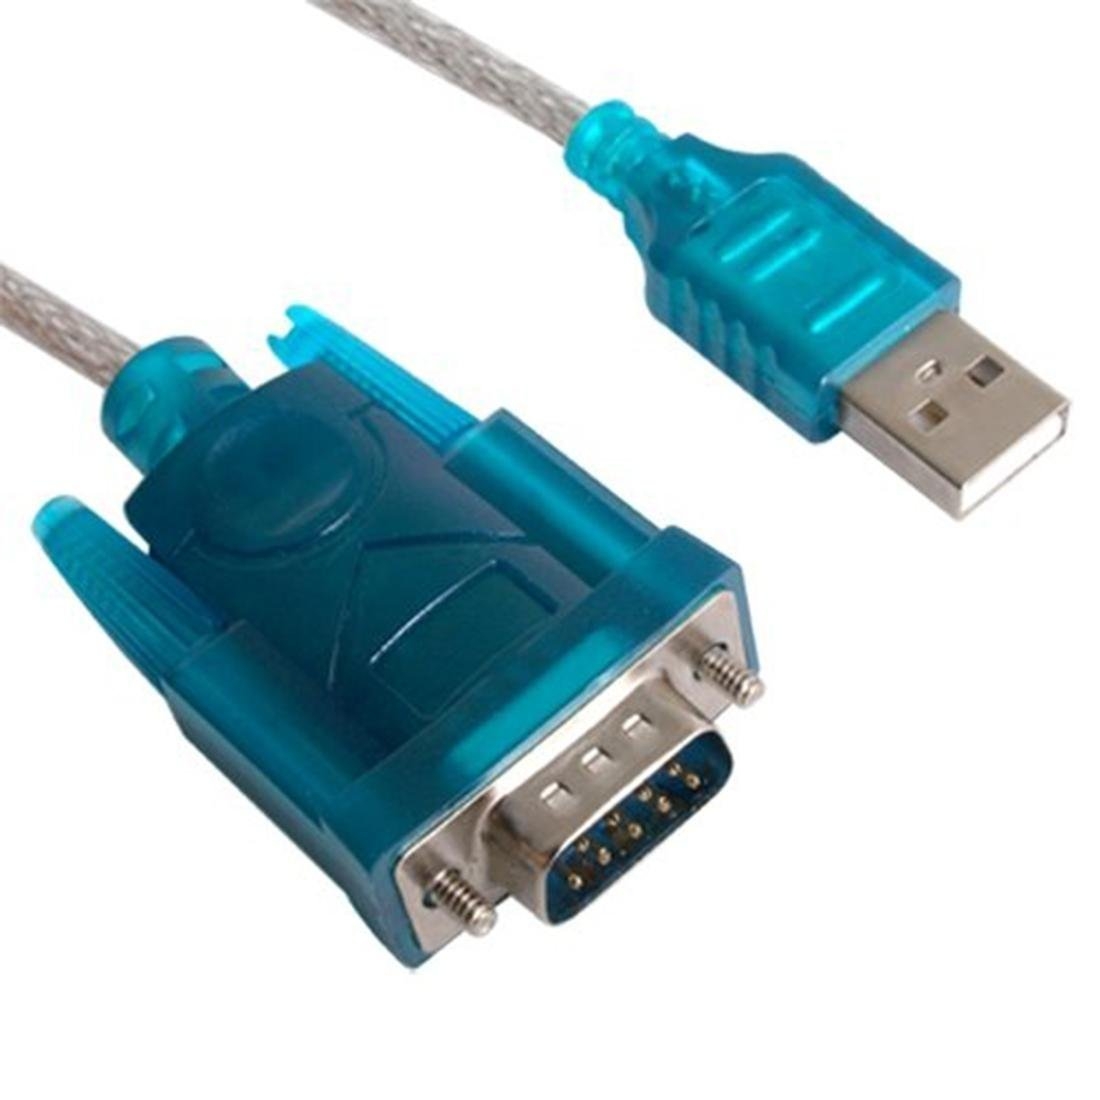 USB 2.0 to RS-232 Serial Cable for Printer, Projector, Scanner, Router, Modem